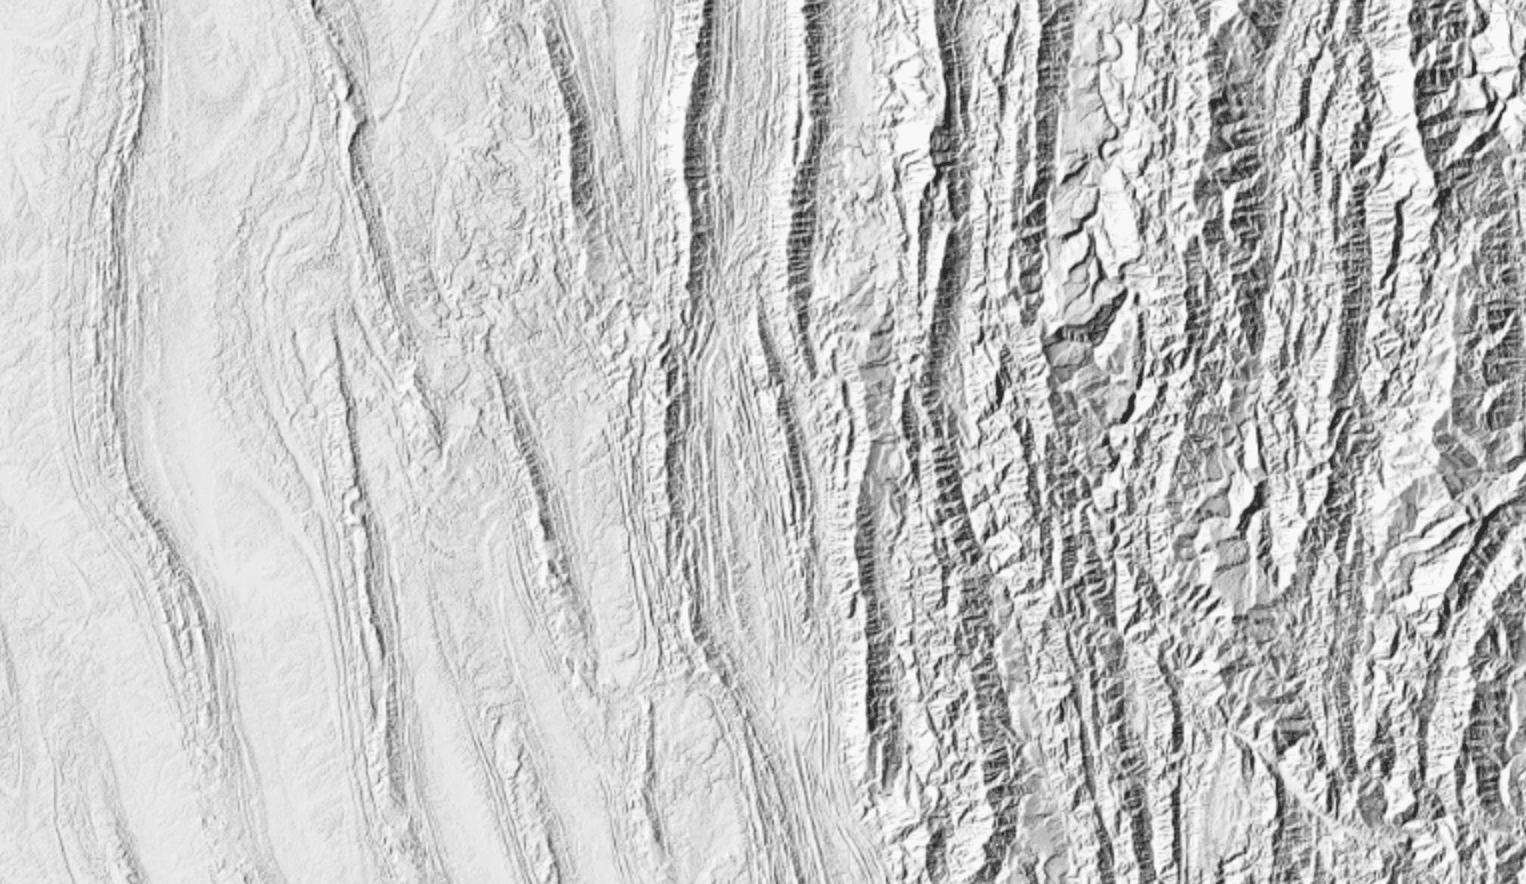 global hillshade with a high-resolution